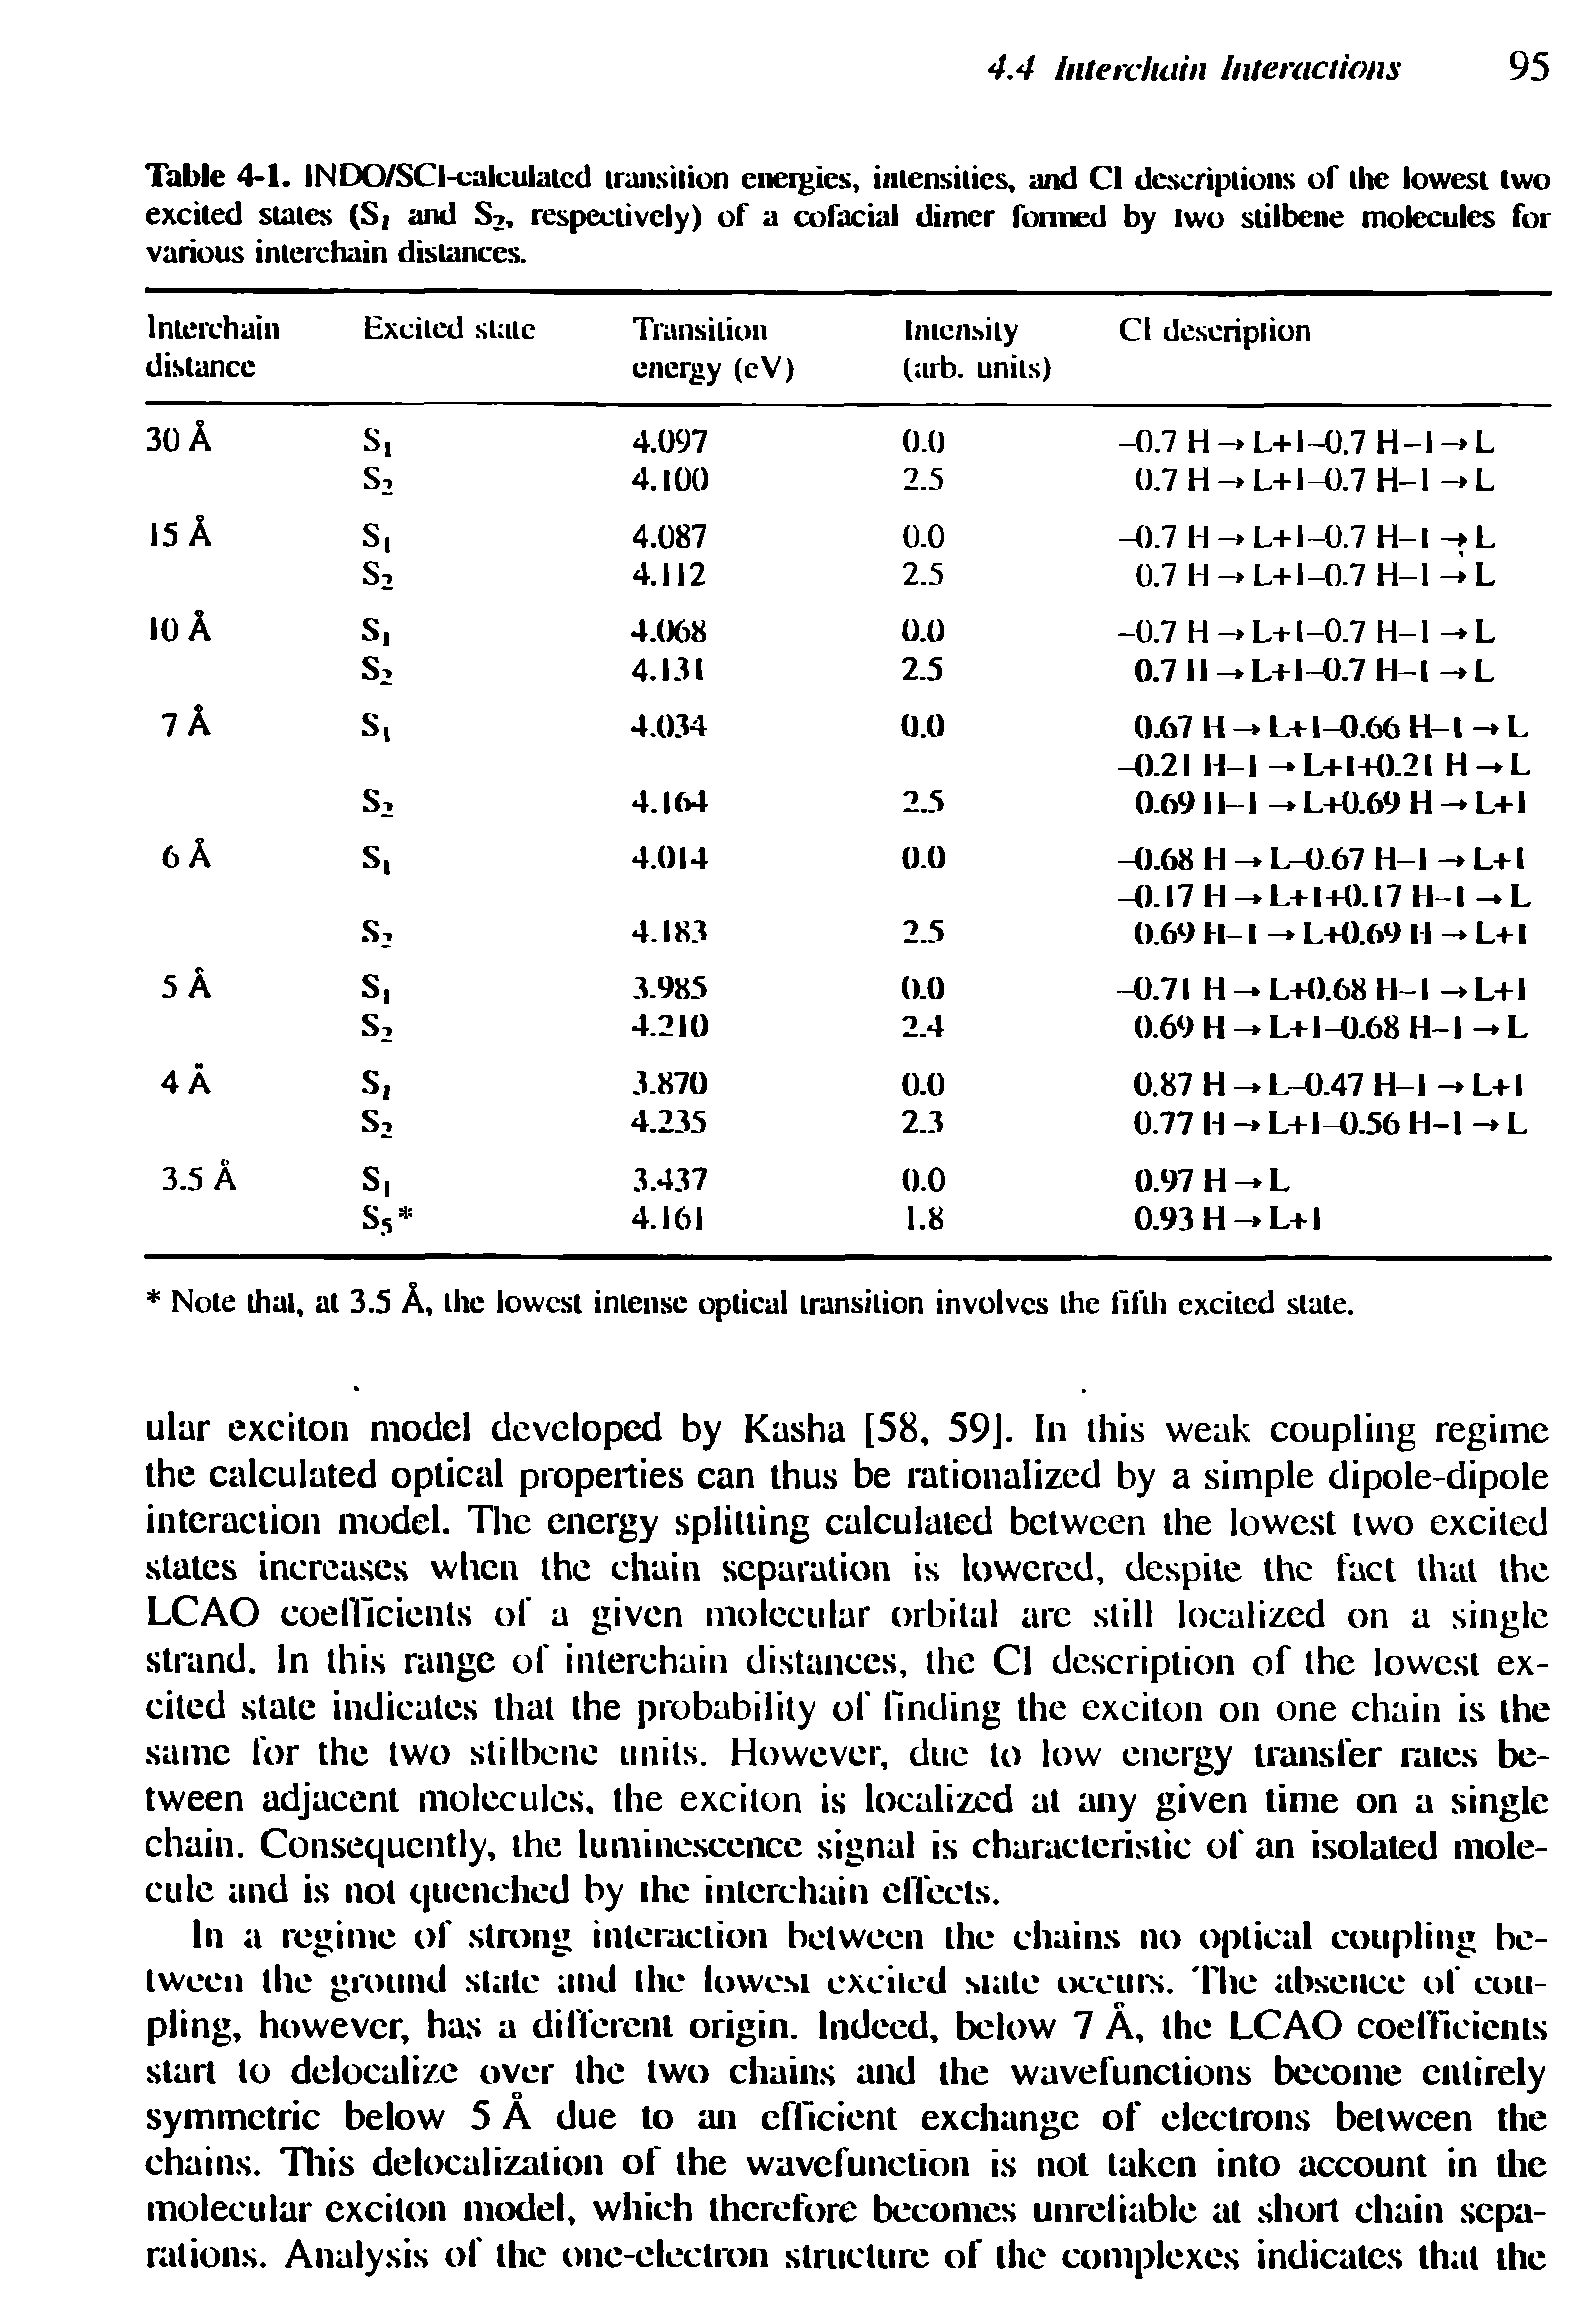 Table 4-1. INDO/SCI-calculalcd iransilion energies, intensities, and Cl dcscriplions of llie lowest two excited stales (S and S2, respectively) of a cofacial dimer formed by Iwo stilbene molecules for various interchain distances.